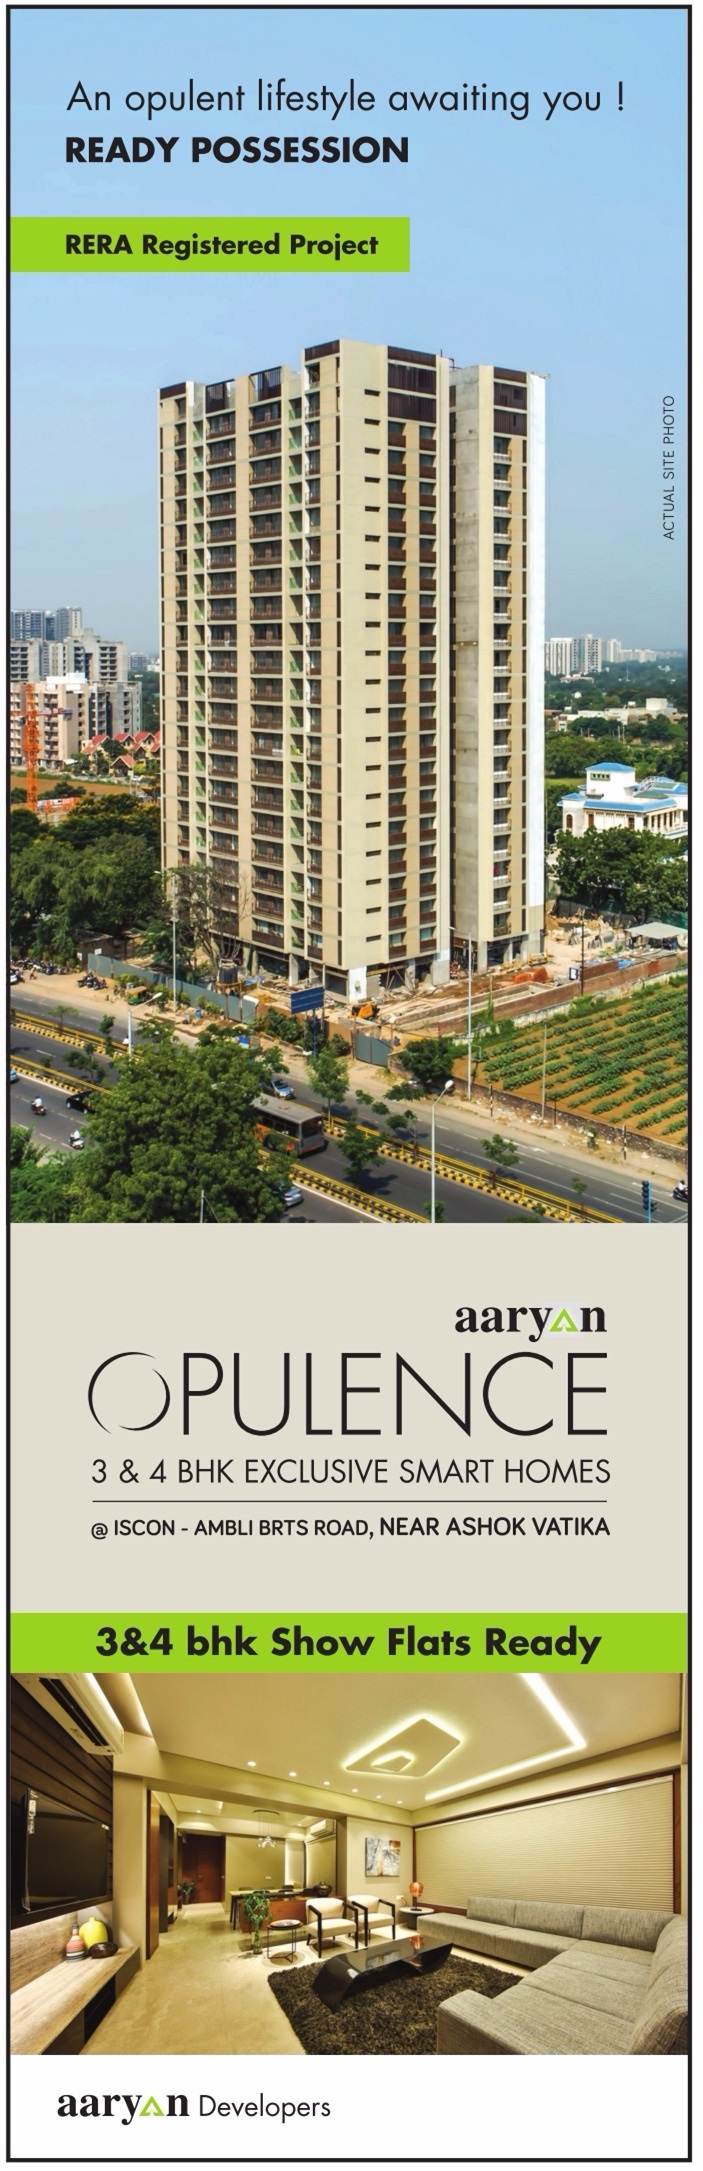 An opulent lifestyle awaiting you at Aaryan Opulence in Ahmedabad Update